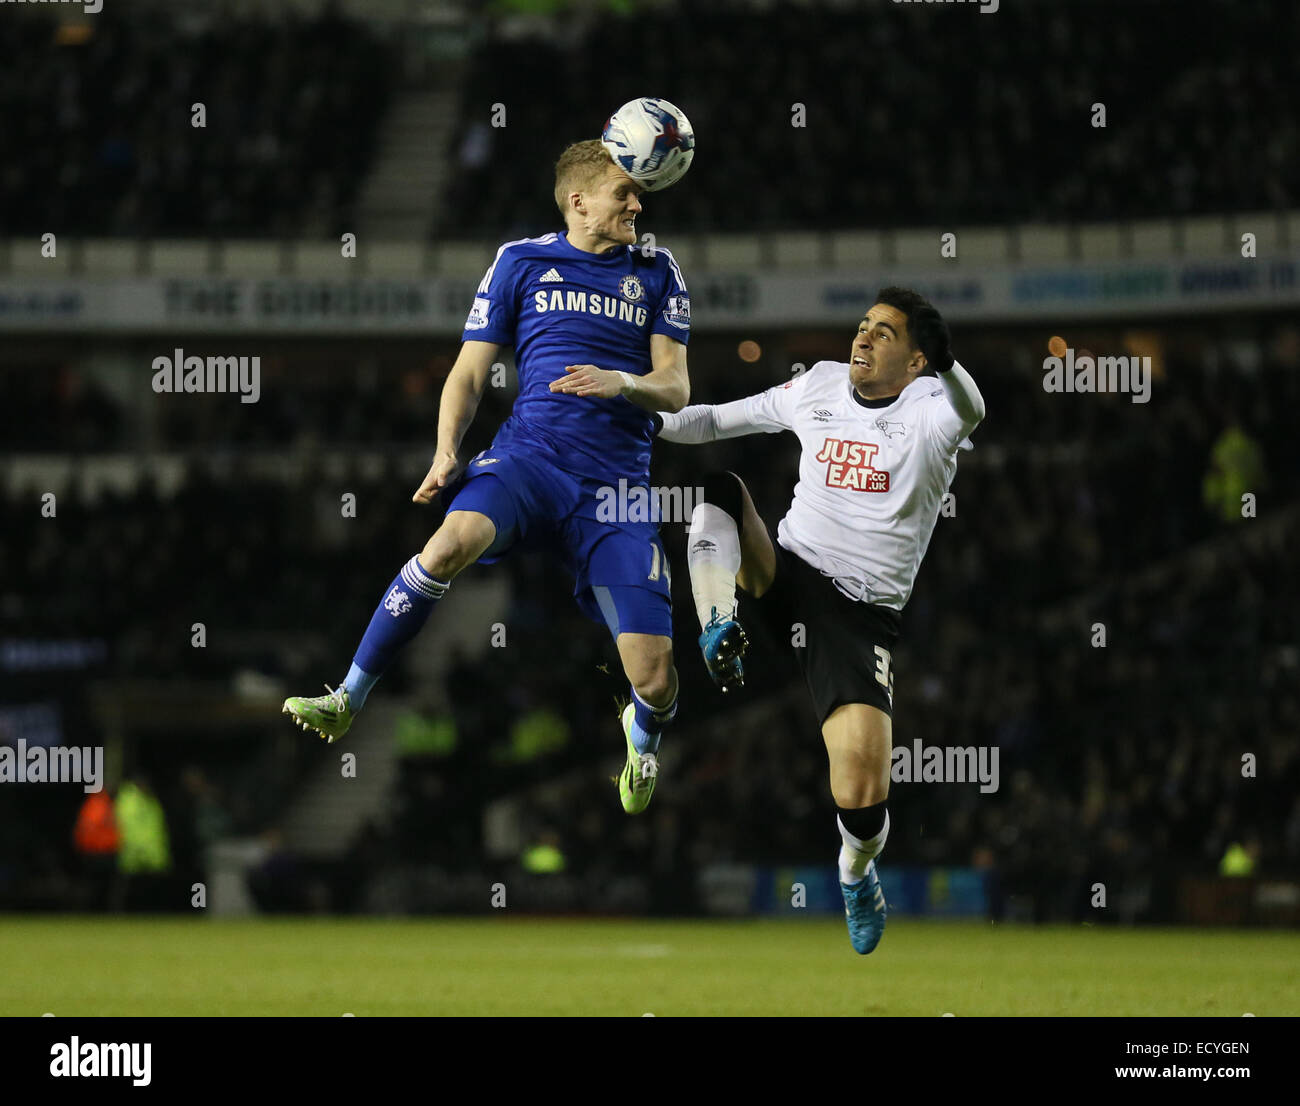 Derby, UK. 16th Dec, 2014. Andre Schurrie of Chelsea tussles with Omar Mascarell of Derby County - Capital One Cup Quarter Final - Derby vs Chelsea - iPro Stadium - Derby - England - 16th December 2014 - Picture Simon Bellis/Sportimage. © csm/Alamy Live News Stock Photo